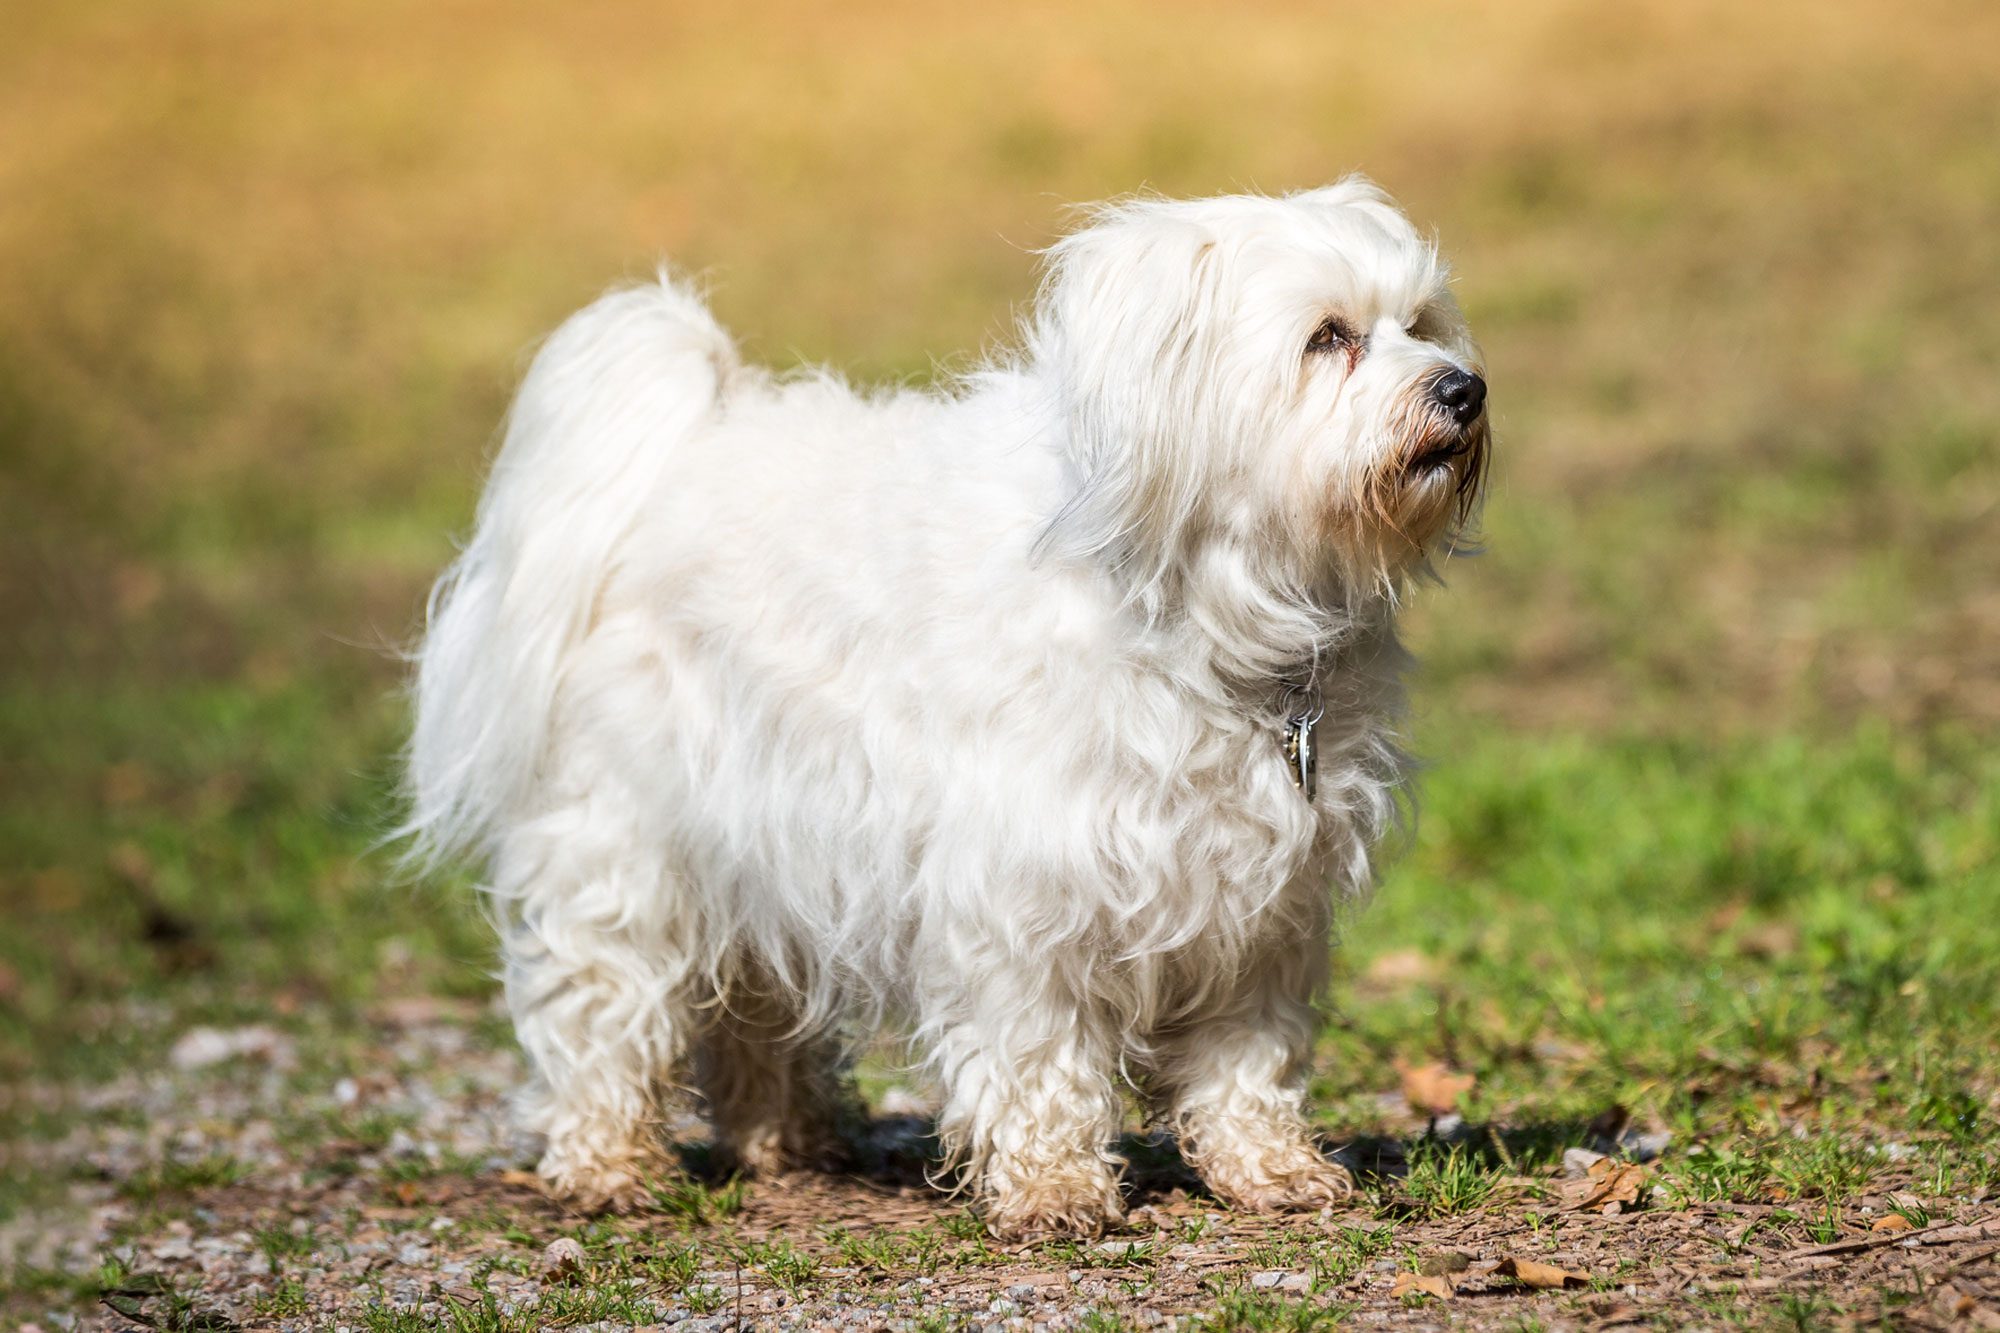 Little White Havanese Is With Great Pride In A Meadow